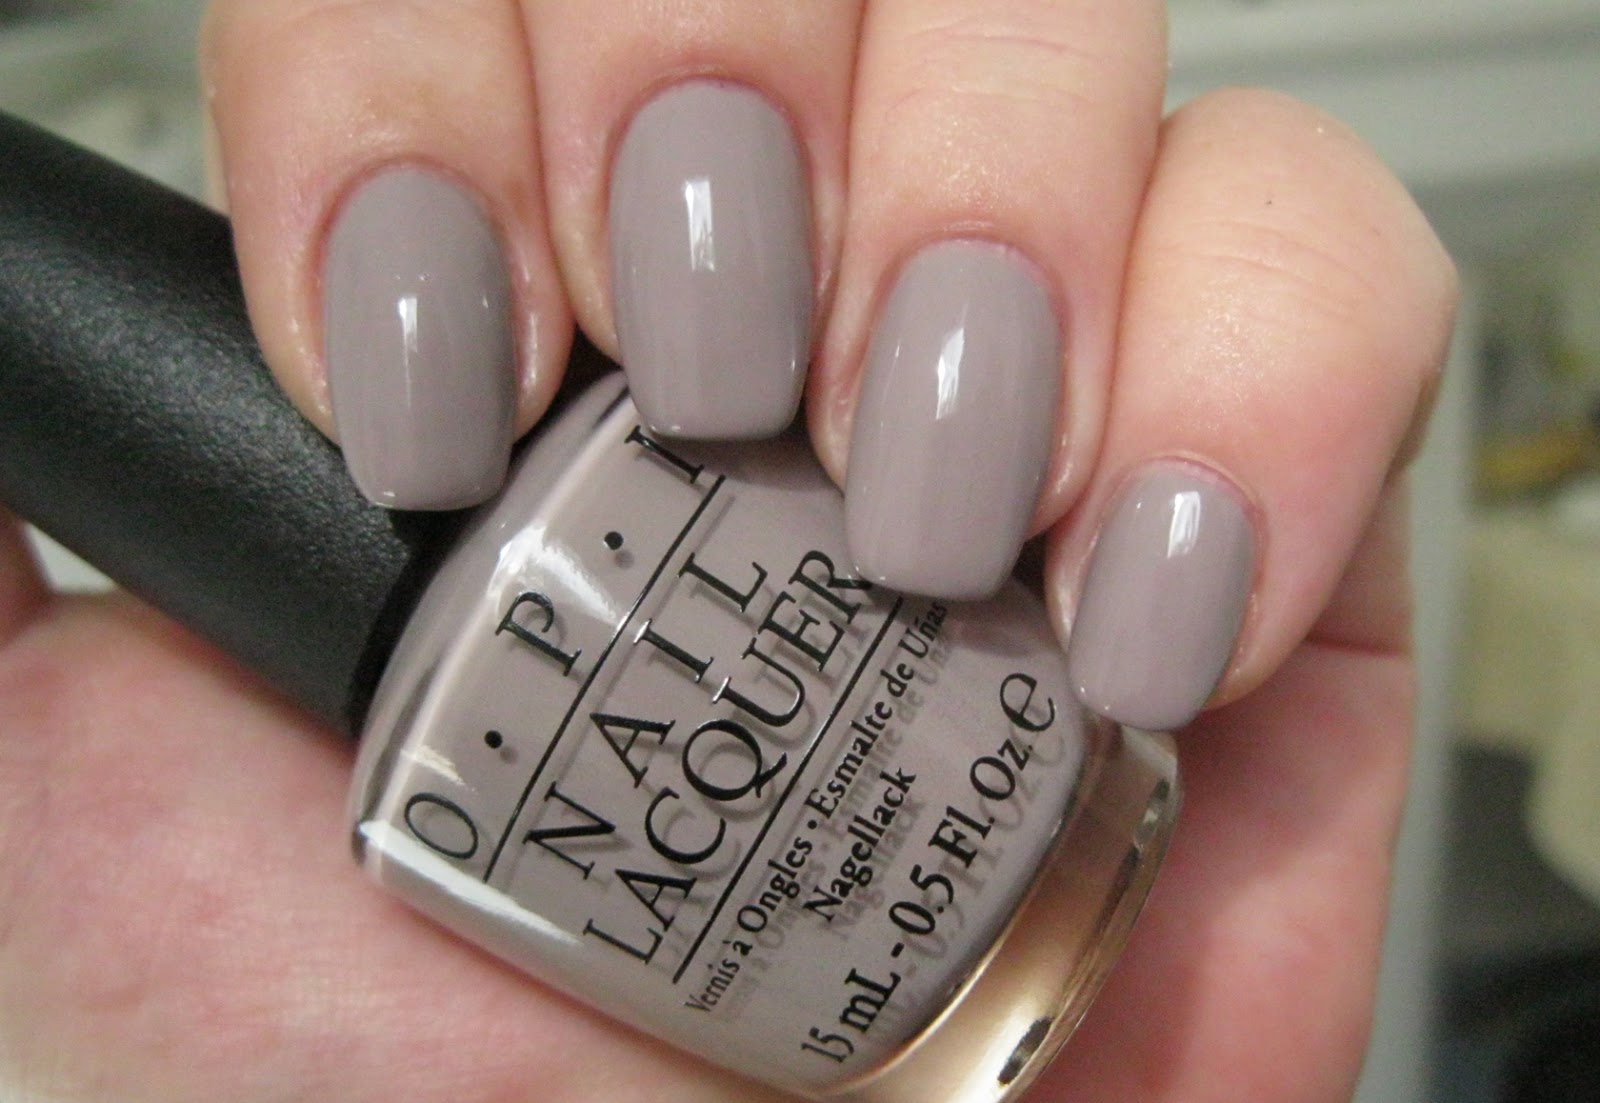 4. OPI Nail Lacquer in "Taupe-less Beach" - wide 2